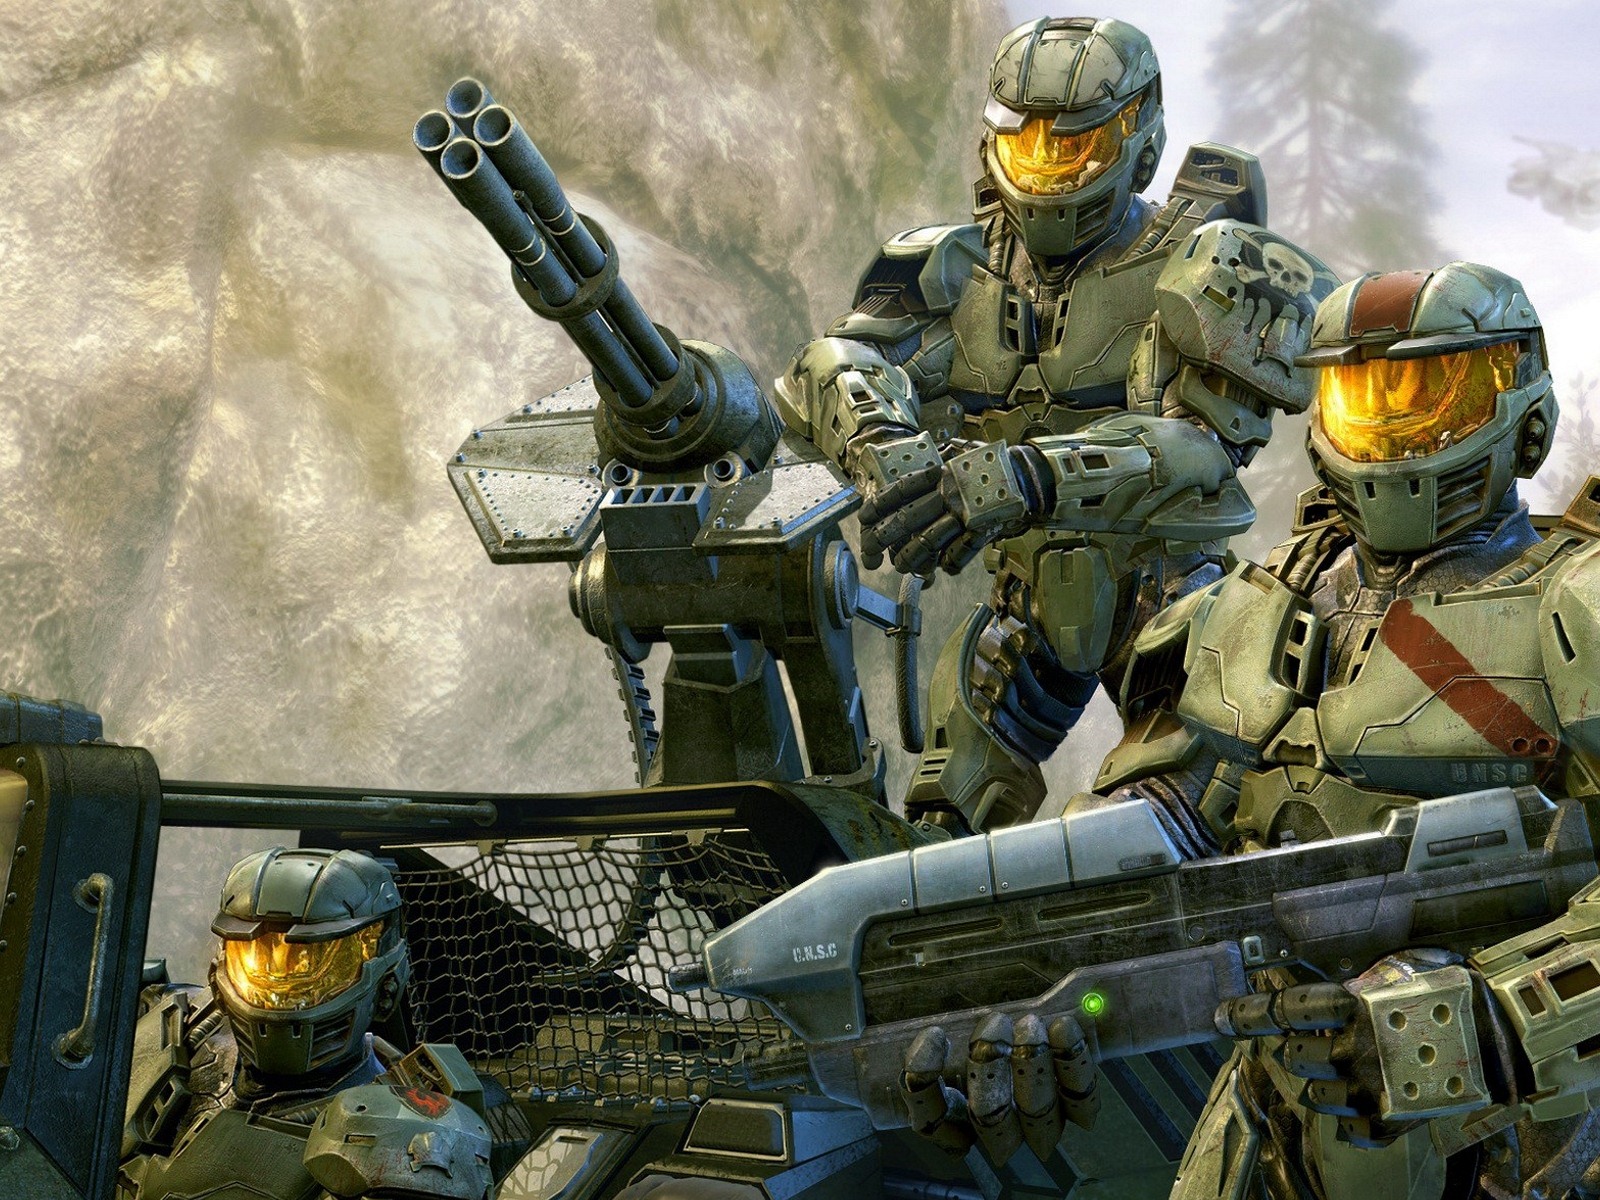 Halo Game HD Wallpapers #7 - 1600x1200